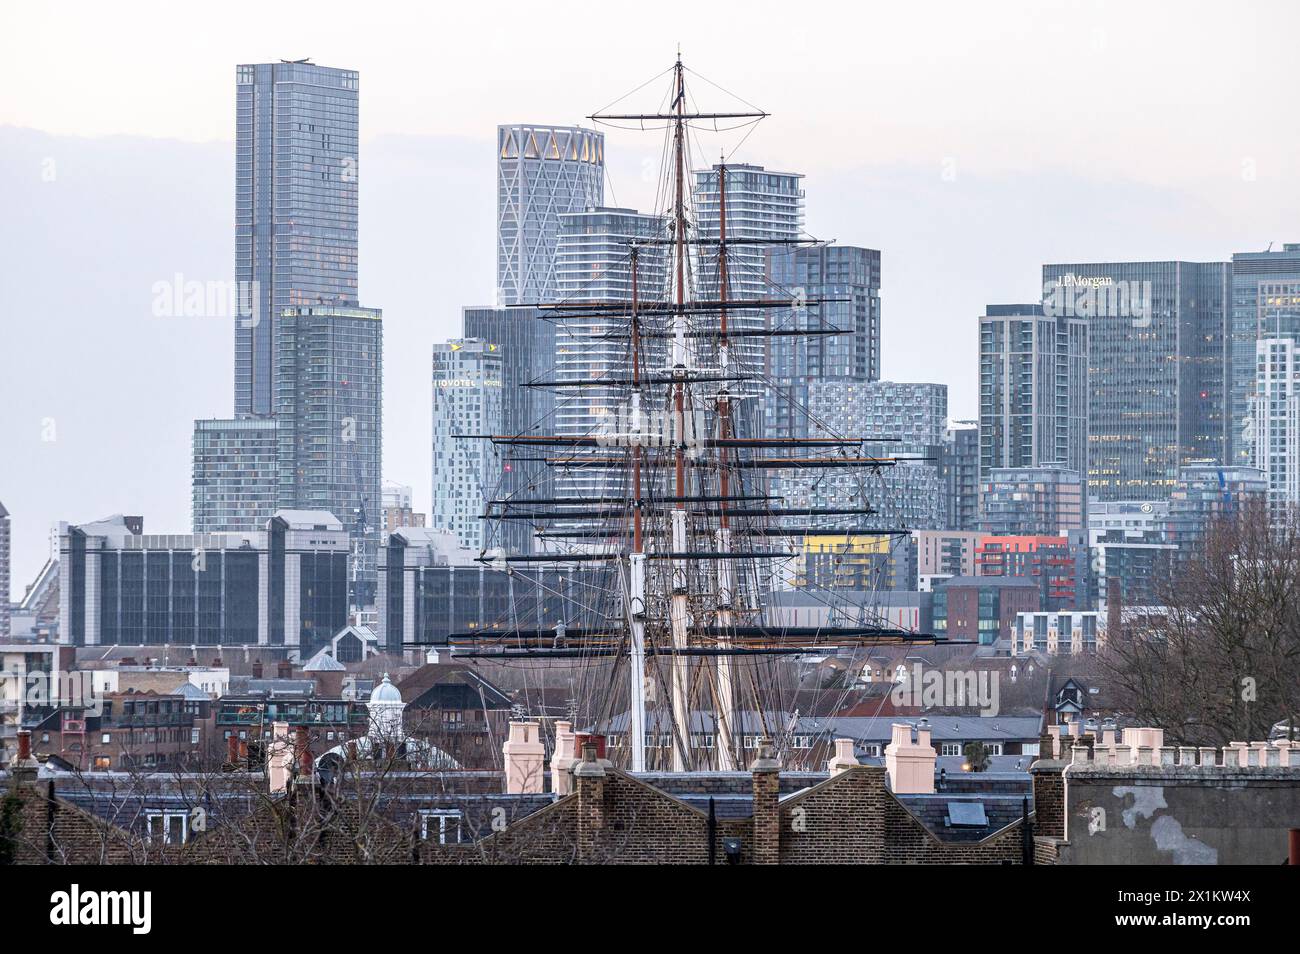 View of the mast of the Cutty Sark in Greenwich, London, UK Stock Photo